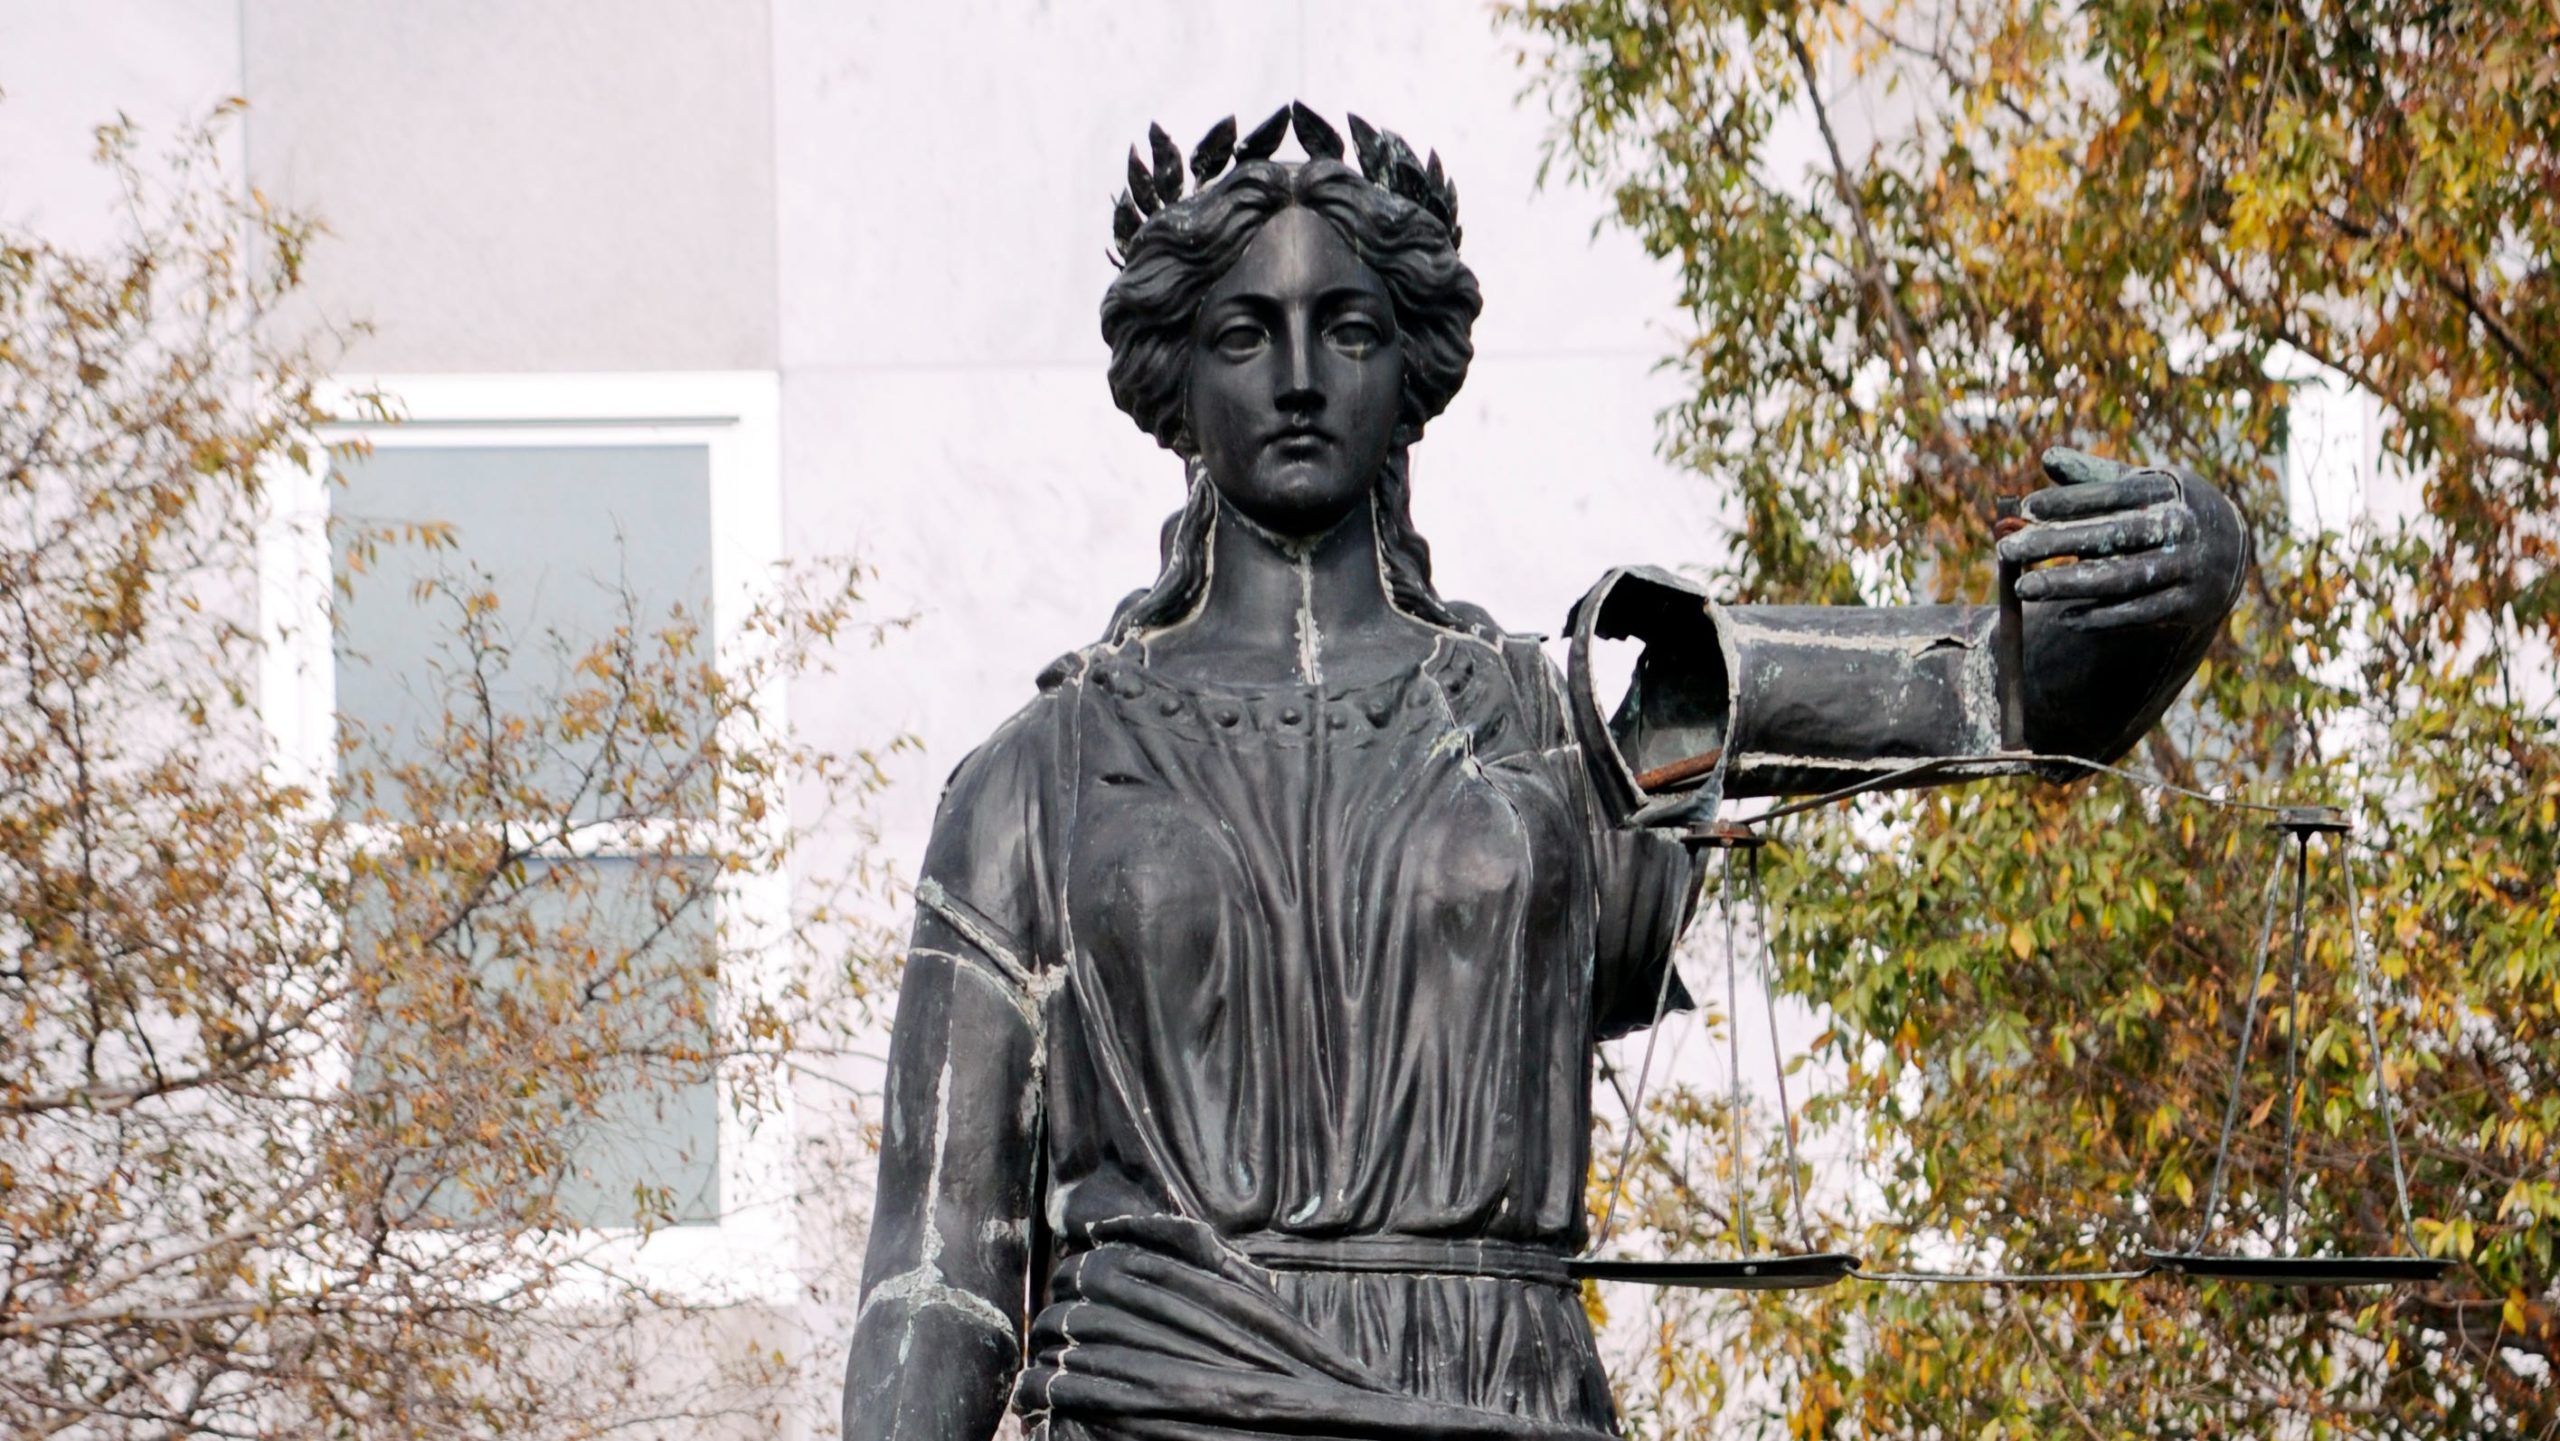 The statue of Lady Justice has been a symbol of justice in Augusta for decades.